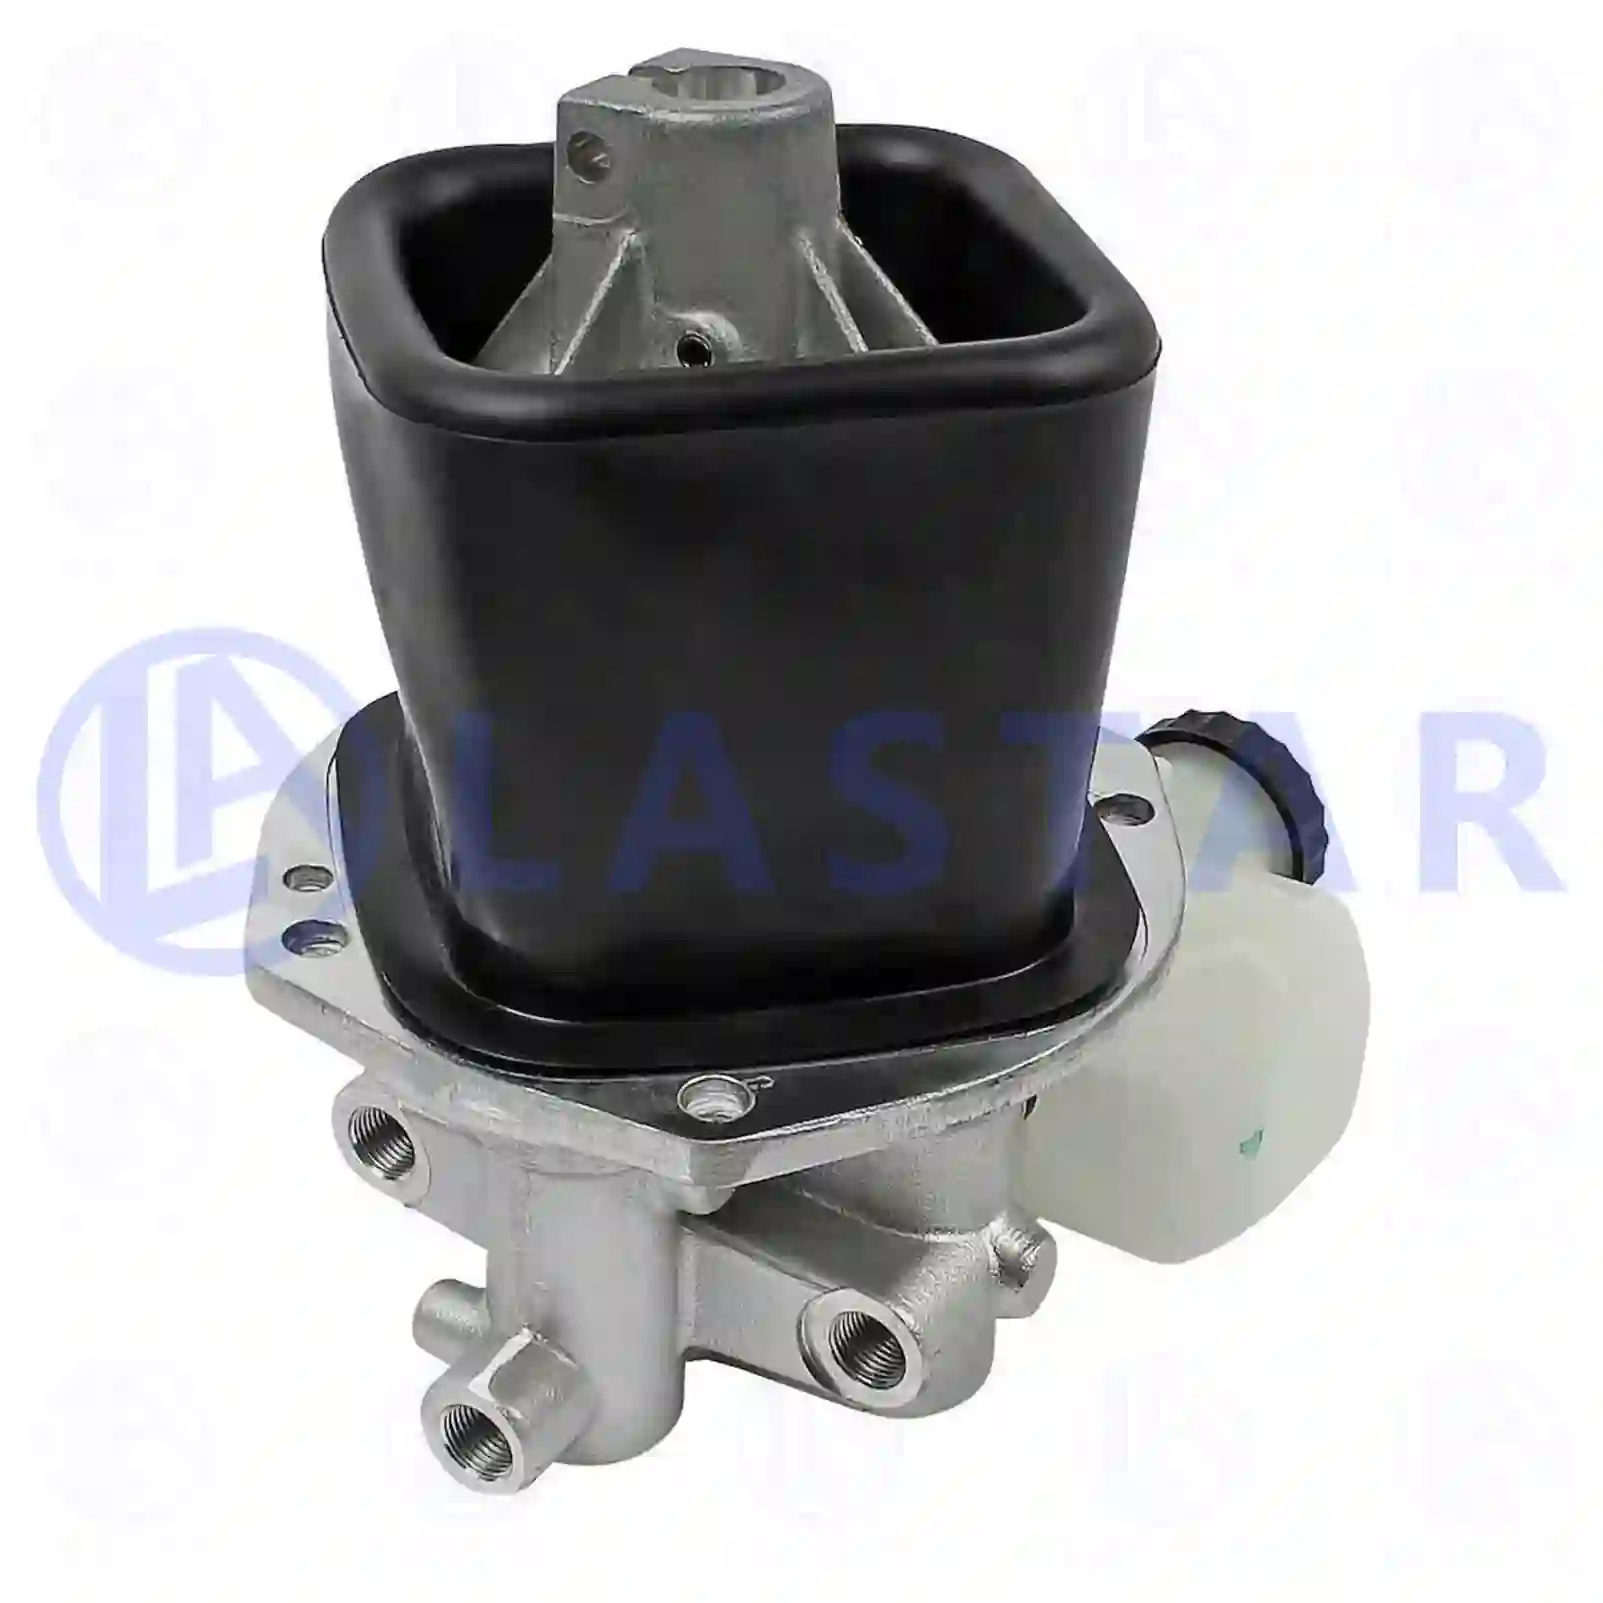 Switching device, gear shift lever, 77732806, 0002604198, 0002607298, ZG21355-0008 ||  77732806 Lastar Spare Part | Truck Spare Parts, Auotomotive Spare Parts Switching device, gear shift lever, 77732806, 0002604198, 0002607298, ZG21355-0008 ||  77732806 Lastar Spare Part | Truck Spare Parts, Auotomotive Spare Parts